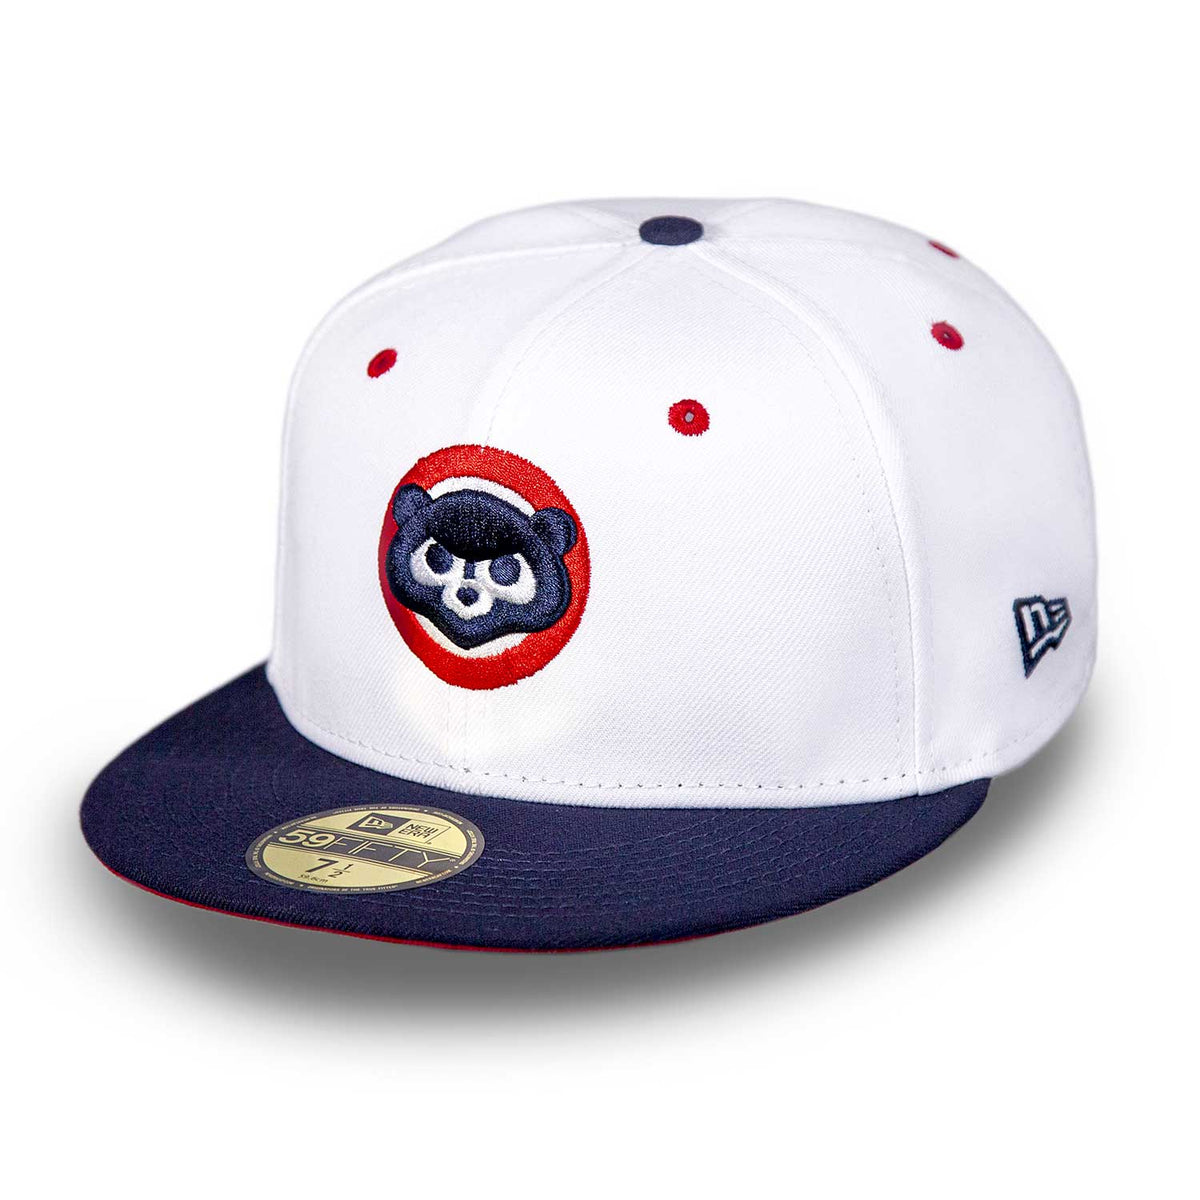 Chicago Cubs 1984 Pinstripe 59FIFTY Fitted Hat by New Era